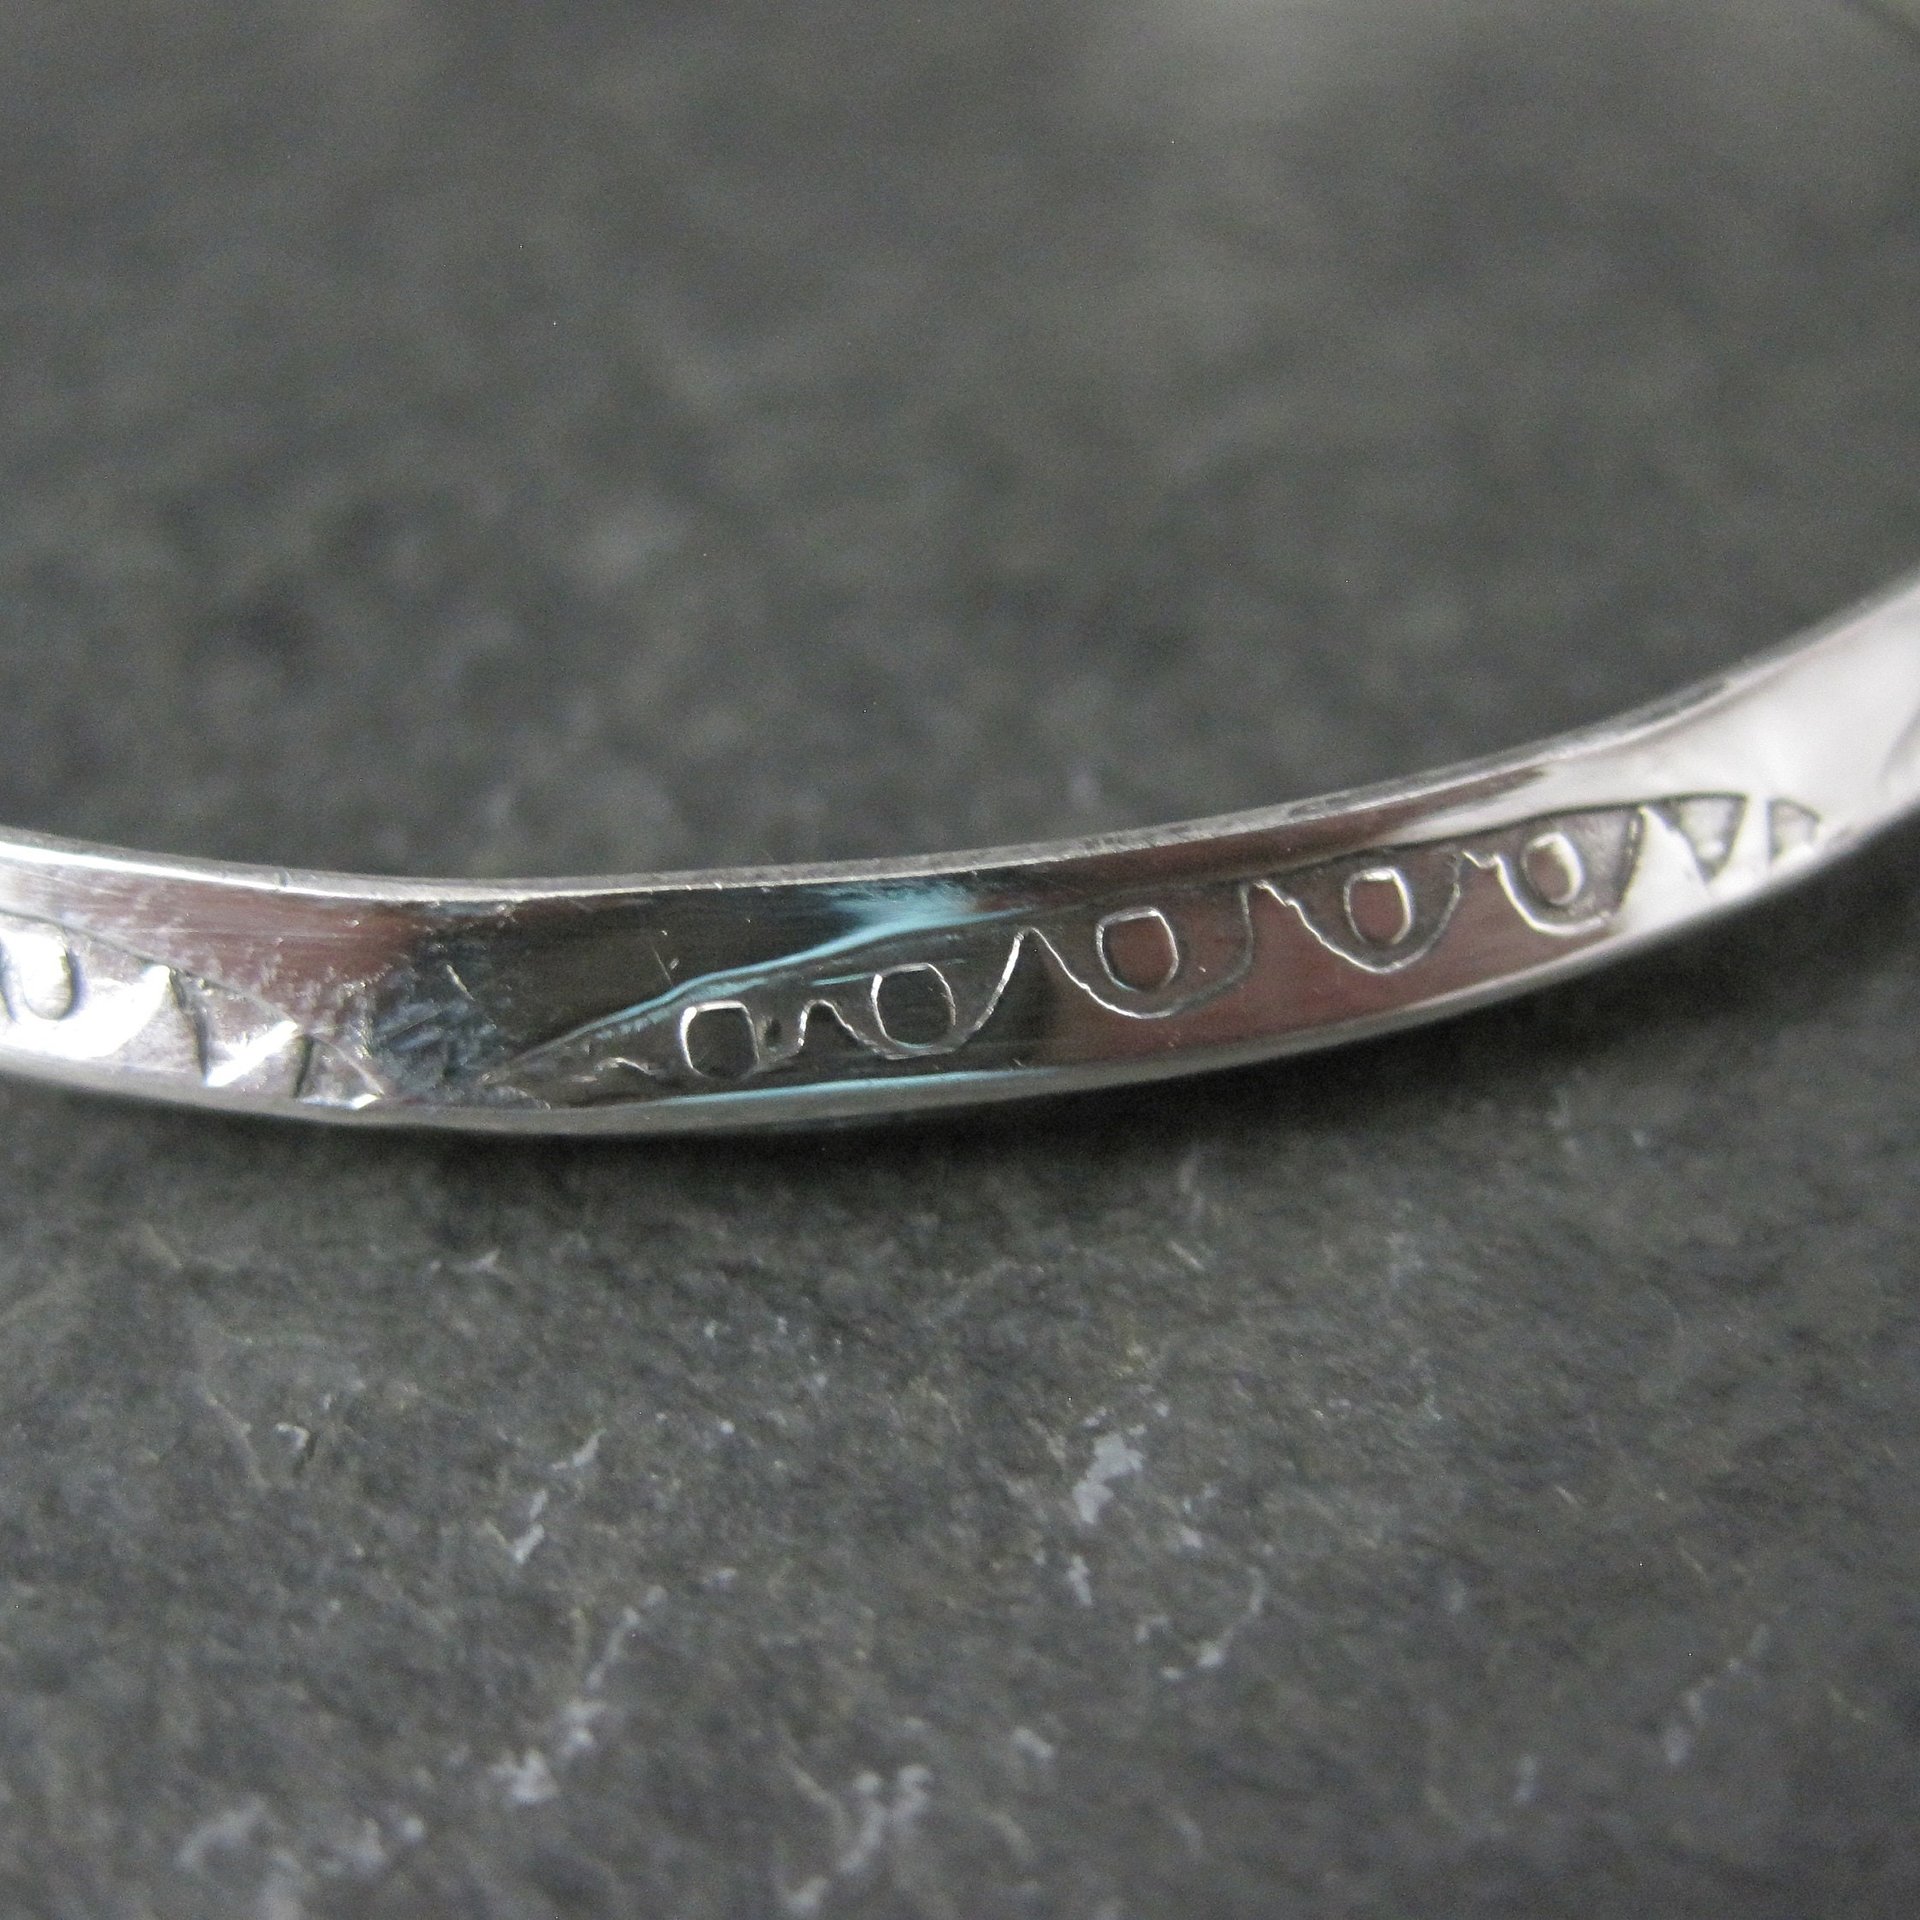 Navajo Carinated 5mm Sterling Bangle Bracelet 8 Inches Tahe 1A